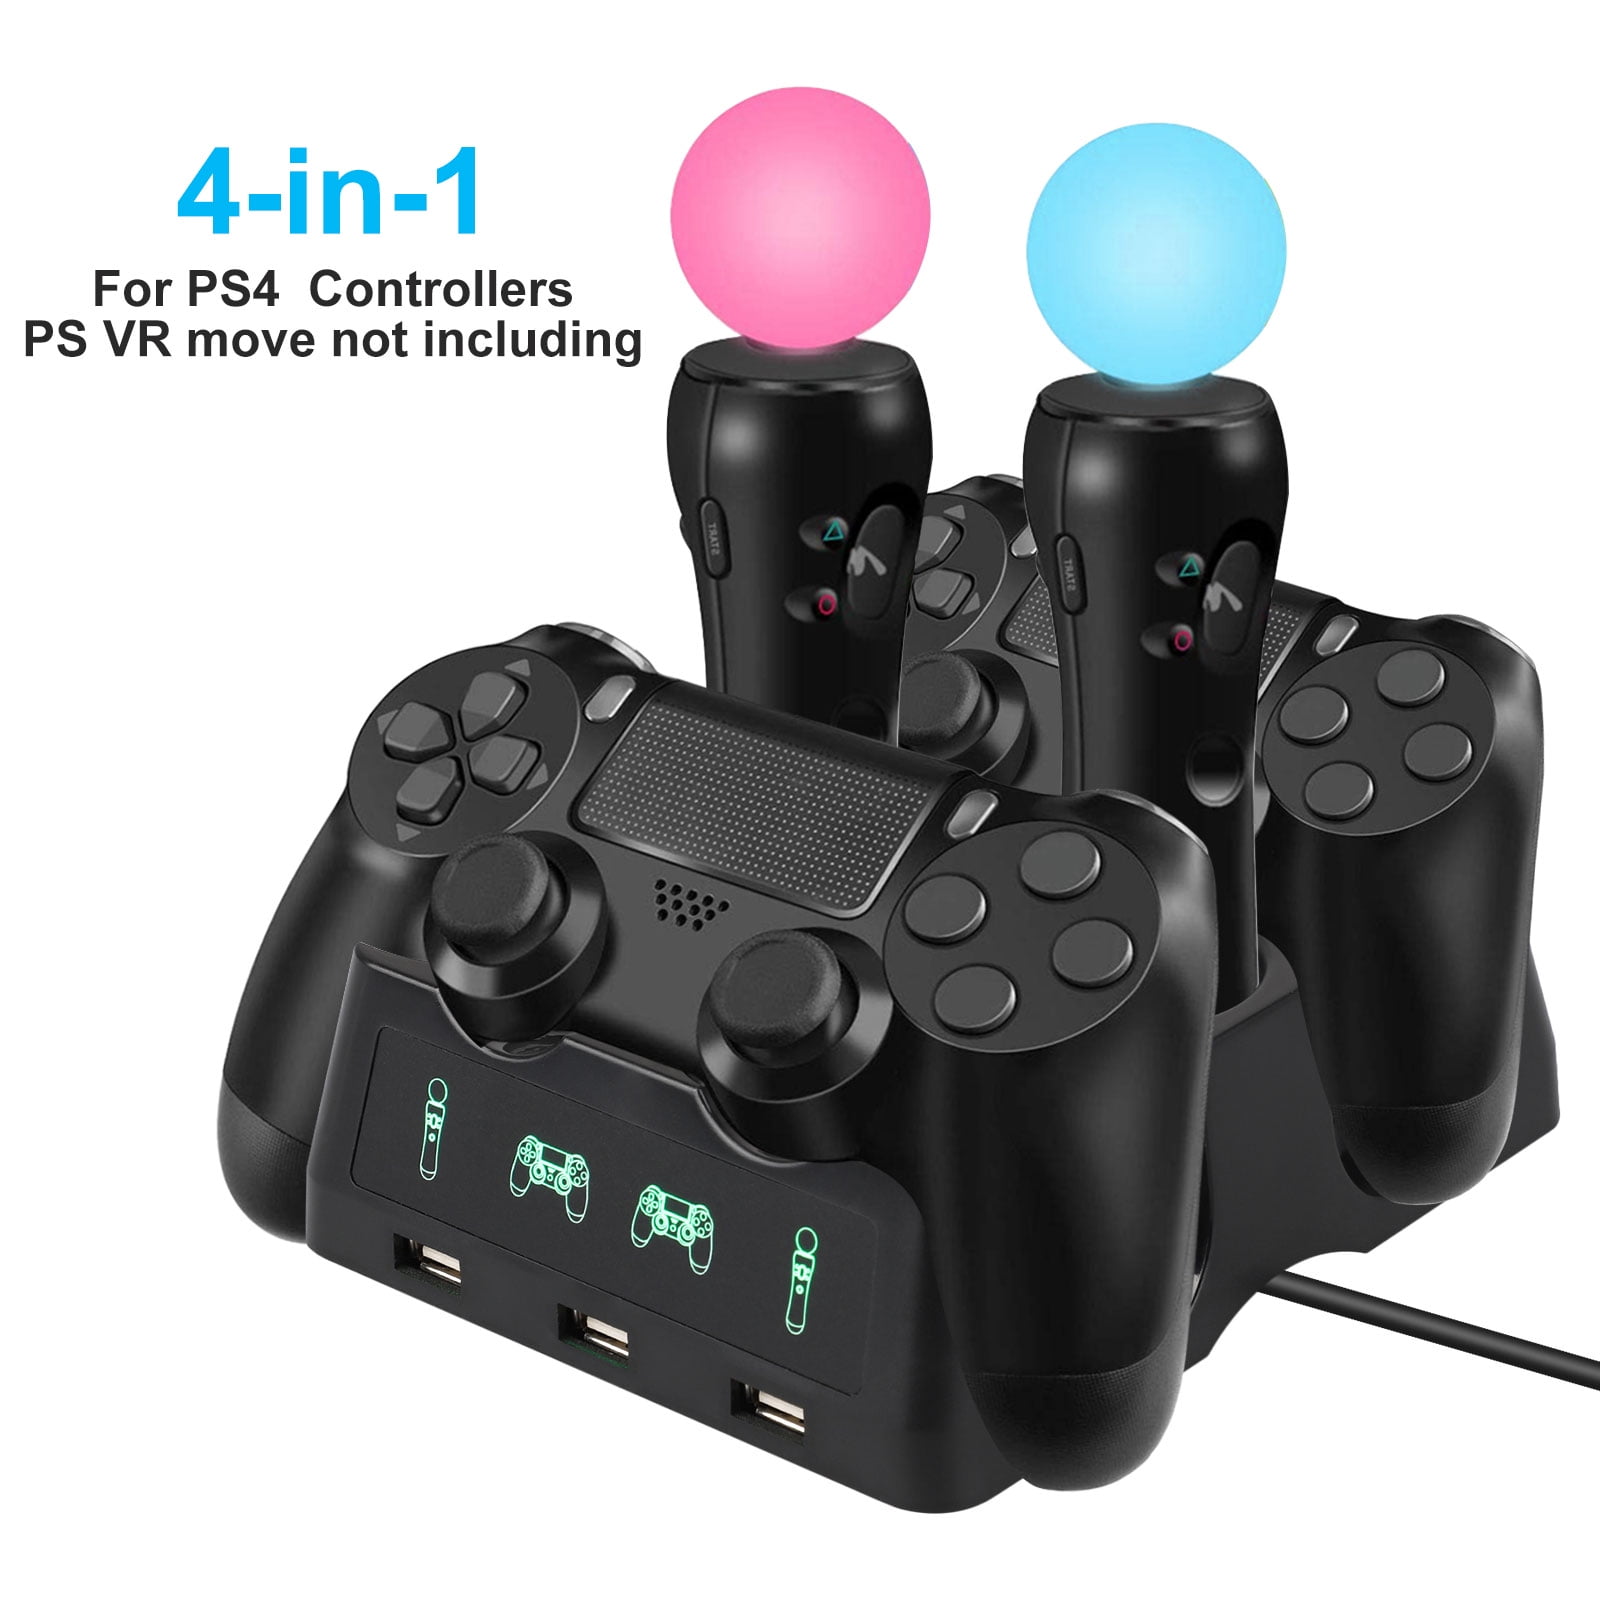 patrice Forbindelse forhold 4-in-1 Controller Charging Dock Station Stand for Playstation PS4/MOVE/PS4  VR Move, EEEkit Quad Charger for PS4 Move Controller and VR Move, Black -  Walmart.com